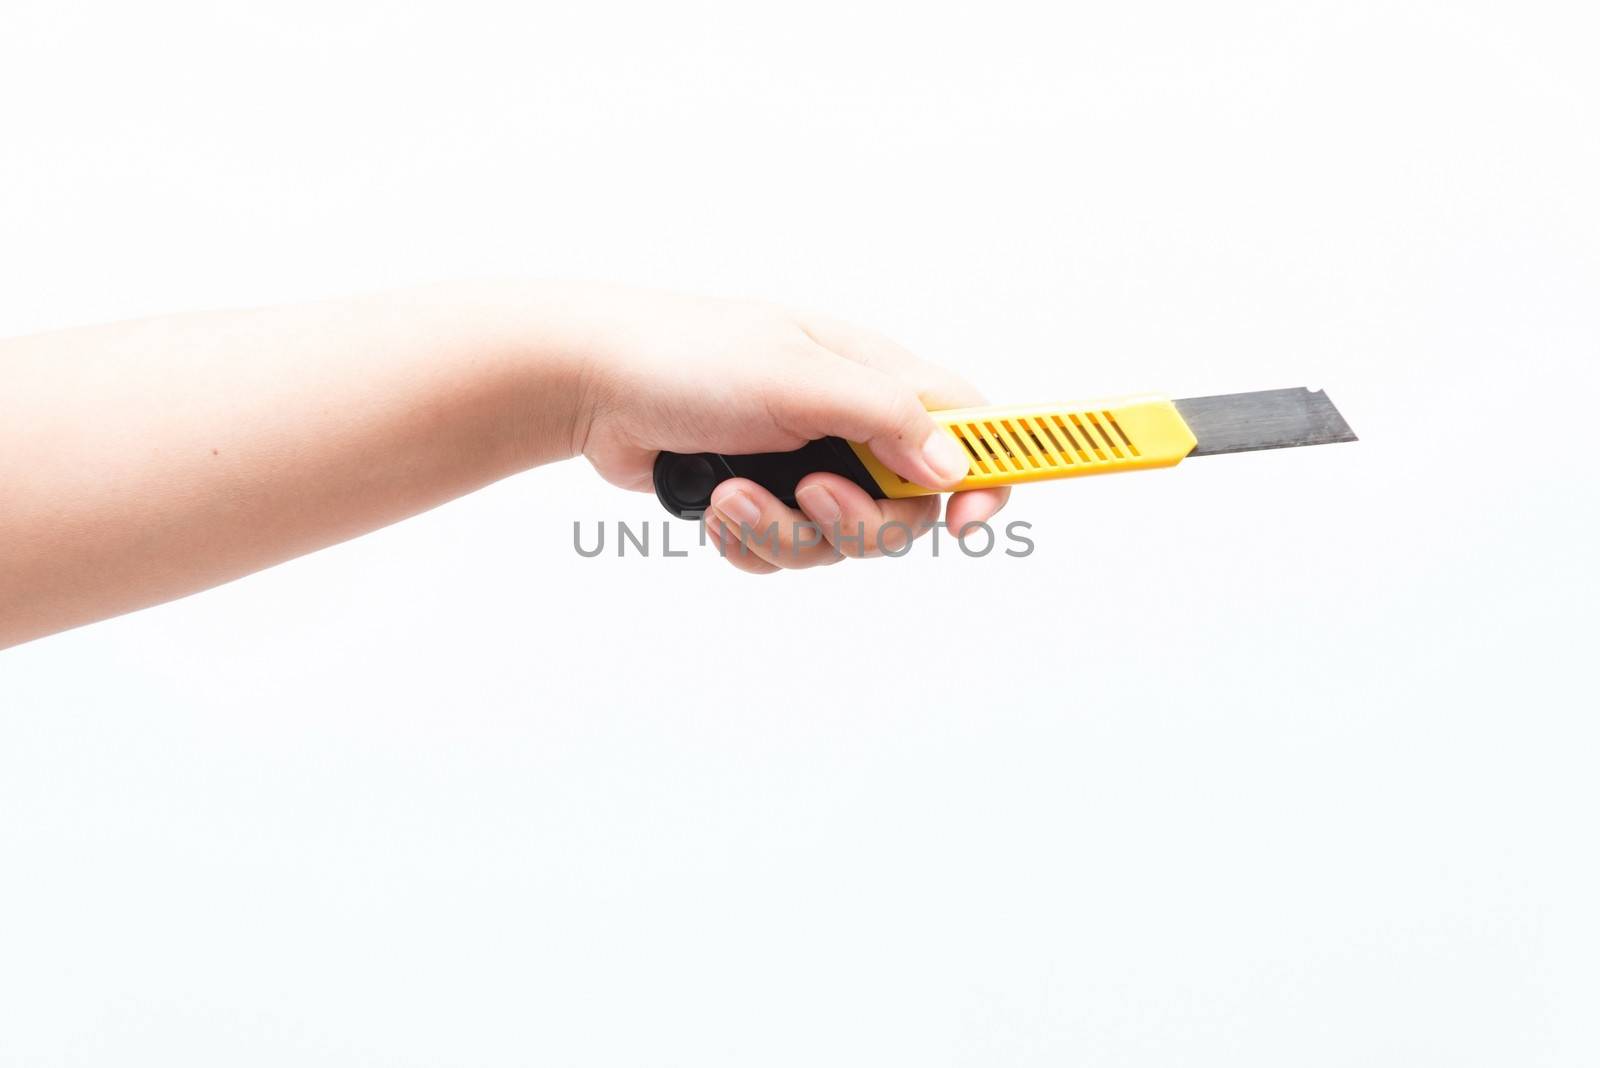 Asian woman holding a yellow box cutter knife, isolated